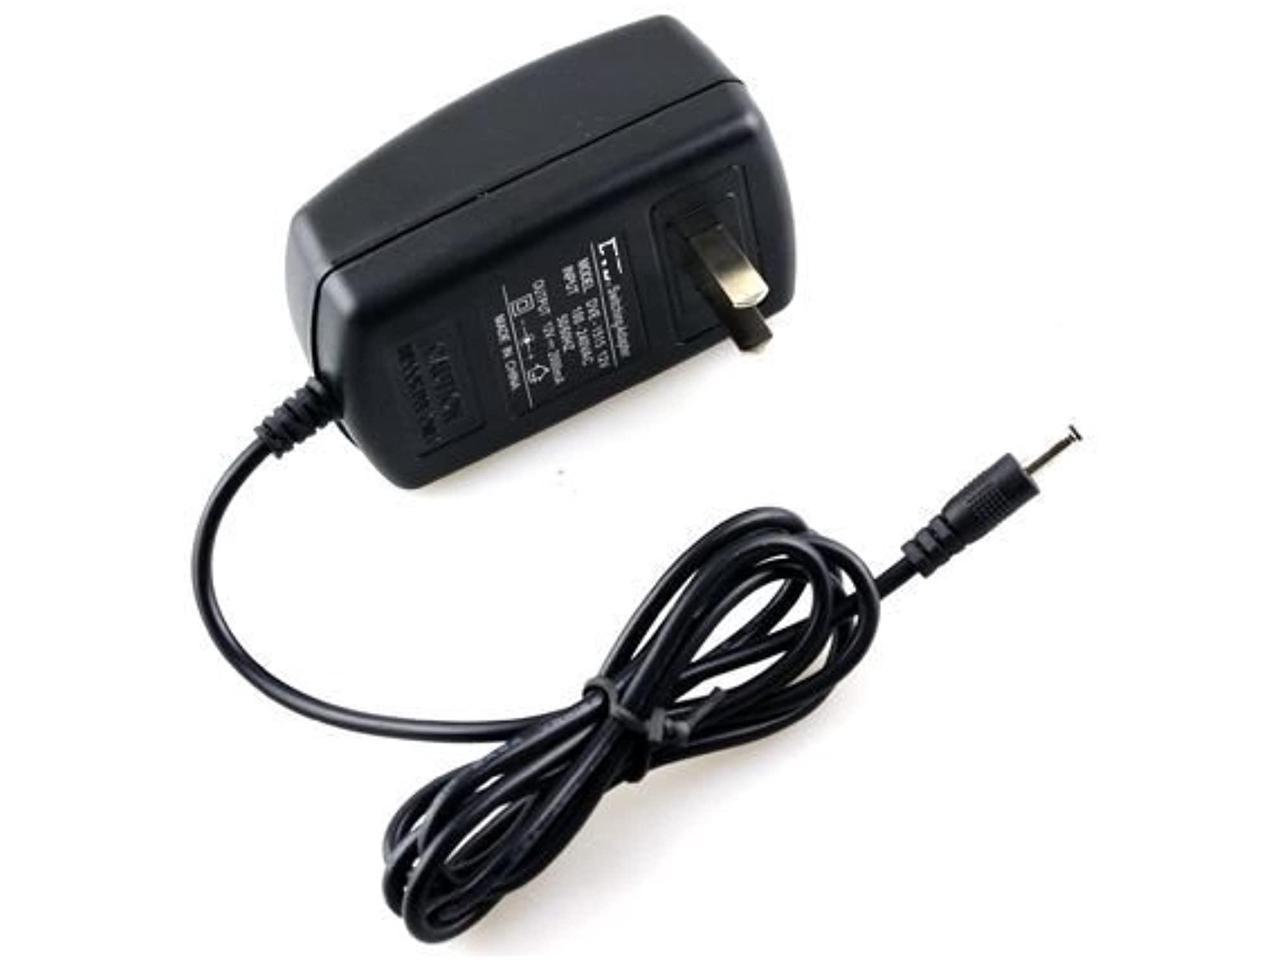 Home Travel Wall AC Power Adapter charger for BlackBerry PlayBook Tablet 5V 2.0A 